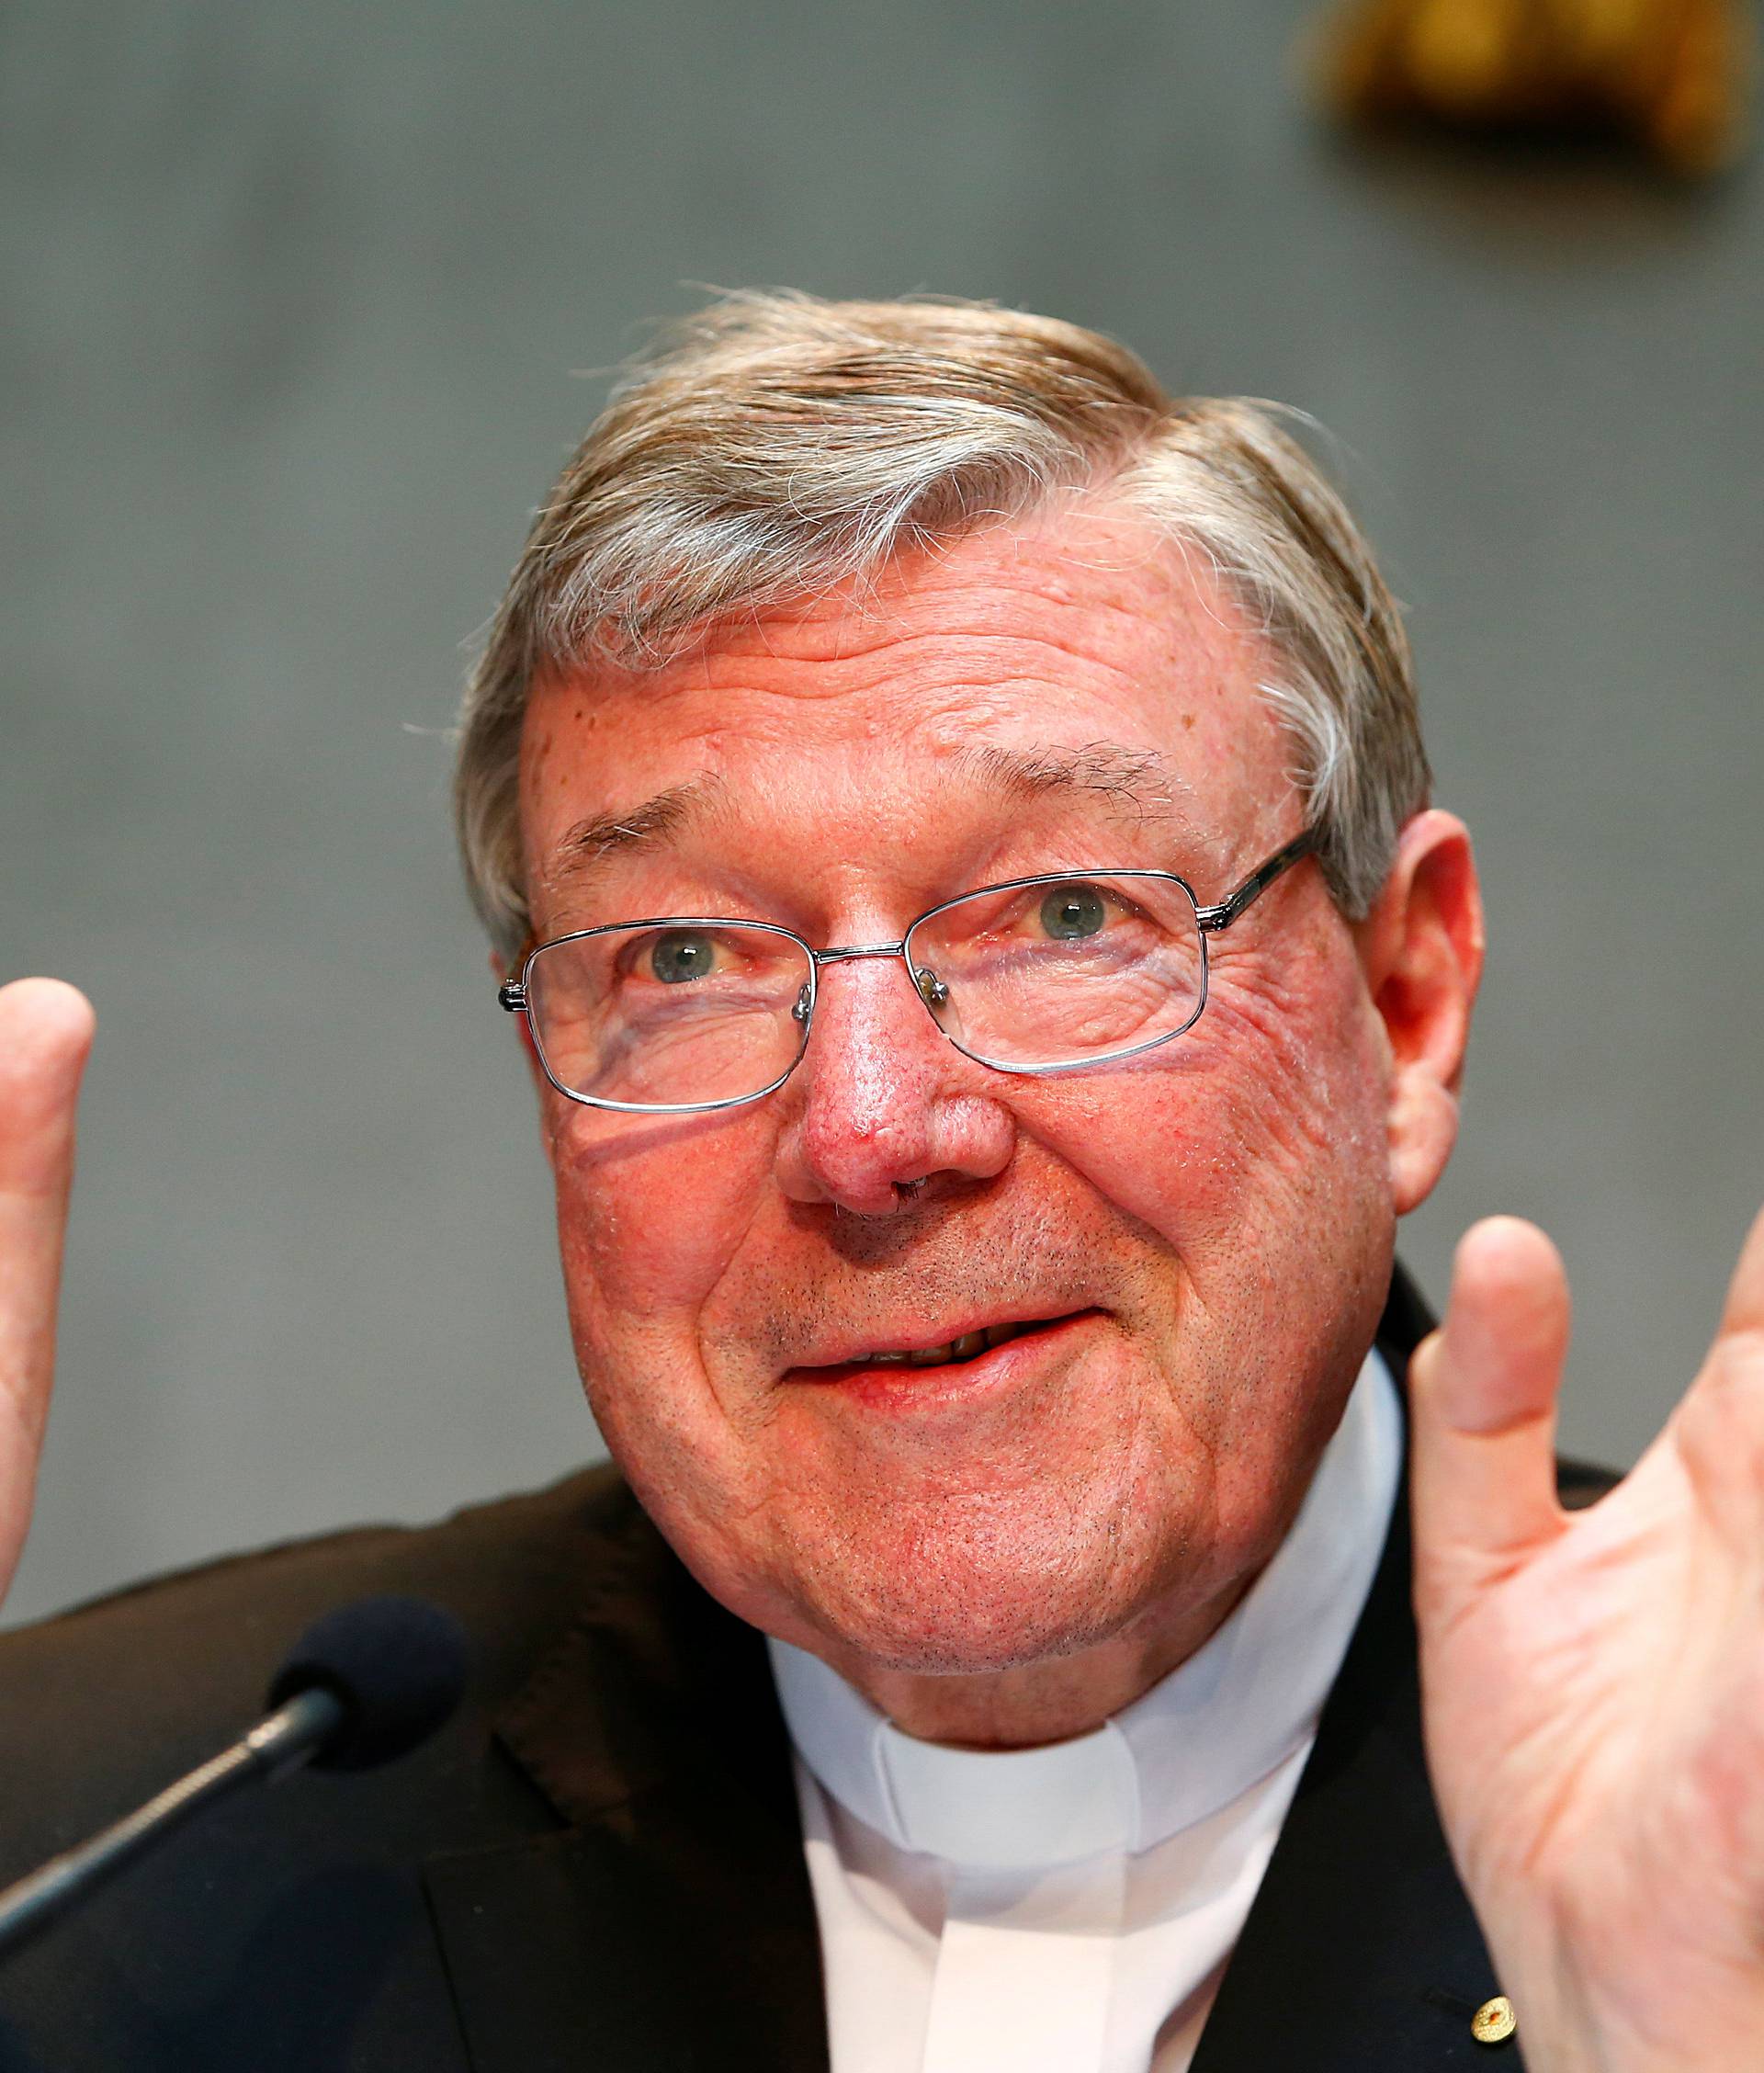 FILE PHOTO - Cardinal George Pell gestures as he talks during a news conference for the presentation of new president of Vatican Bank IOR, at the Vatican